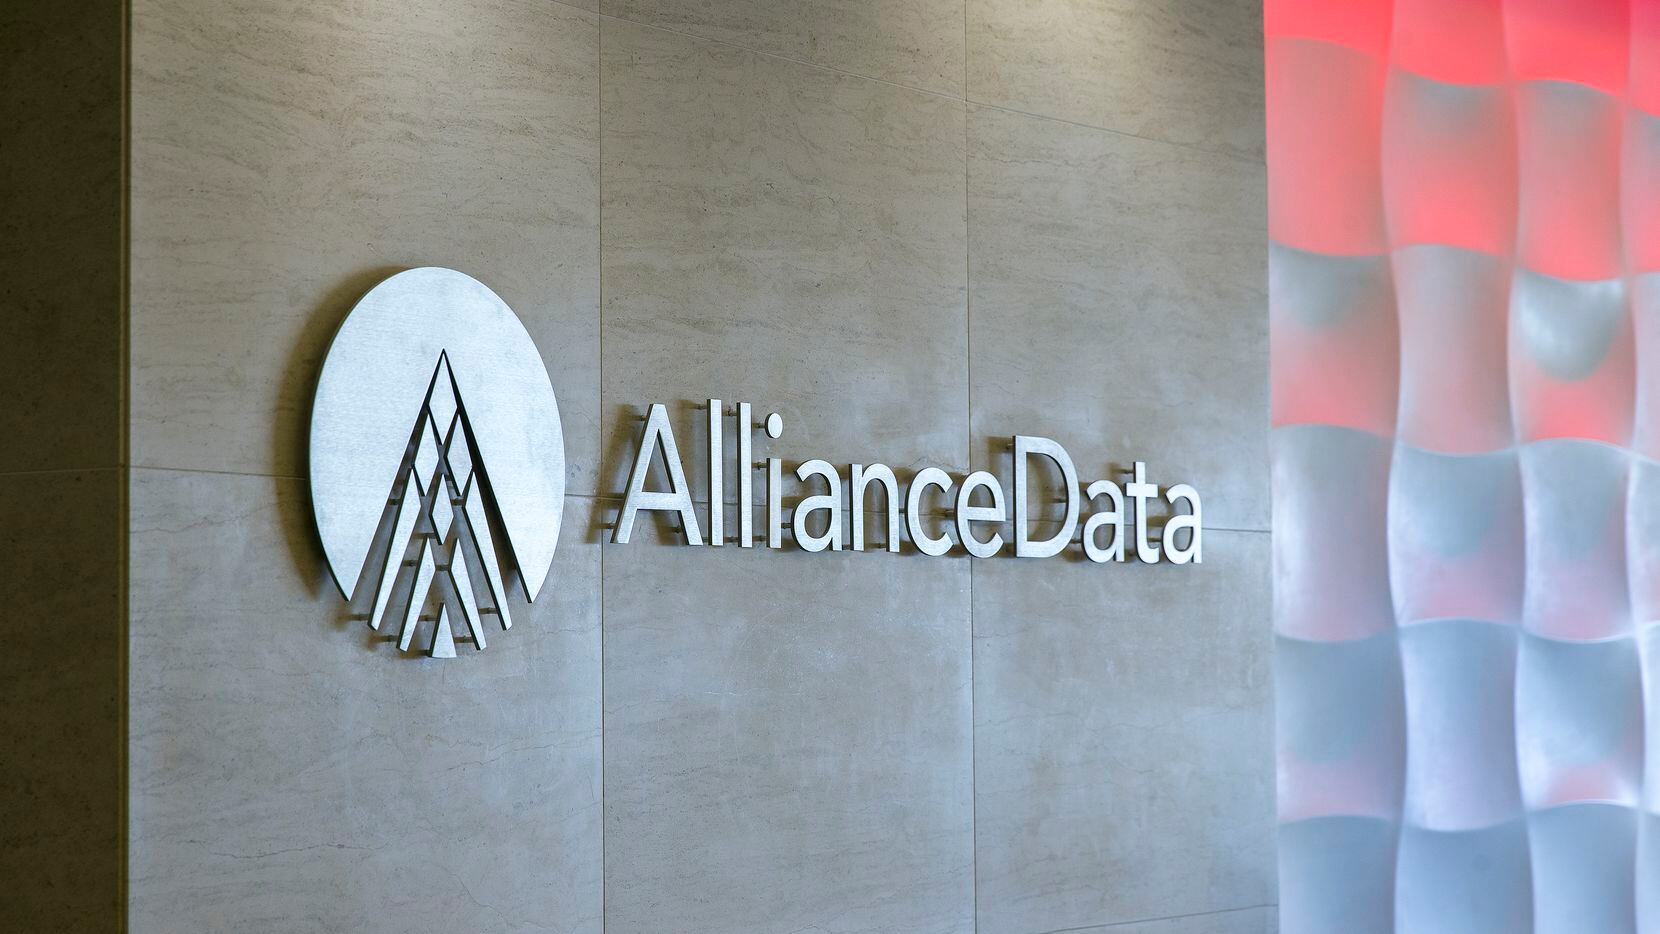 Alliance Data was headquartered in Plano before it moved to Ohio in June 2019, just months...